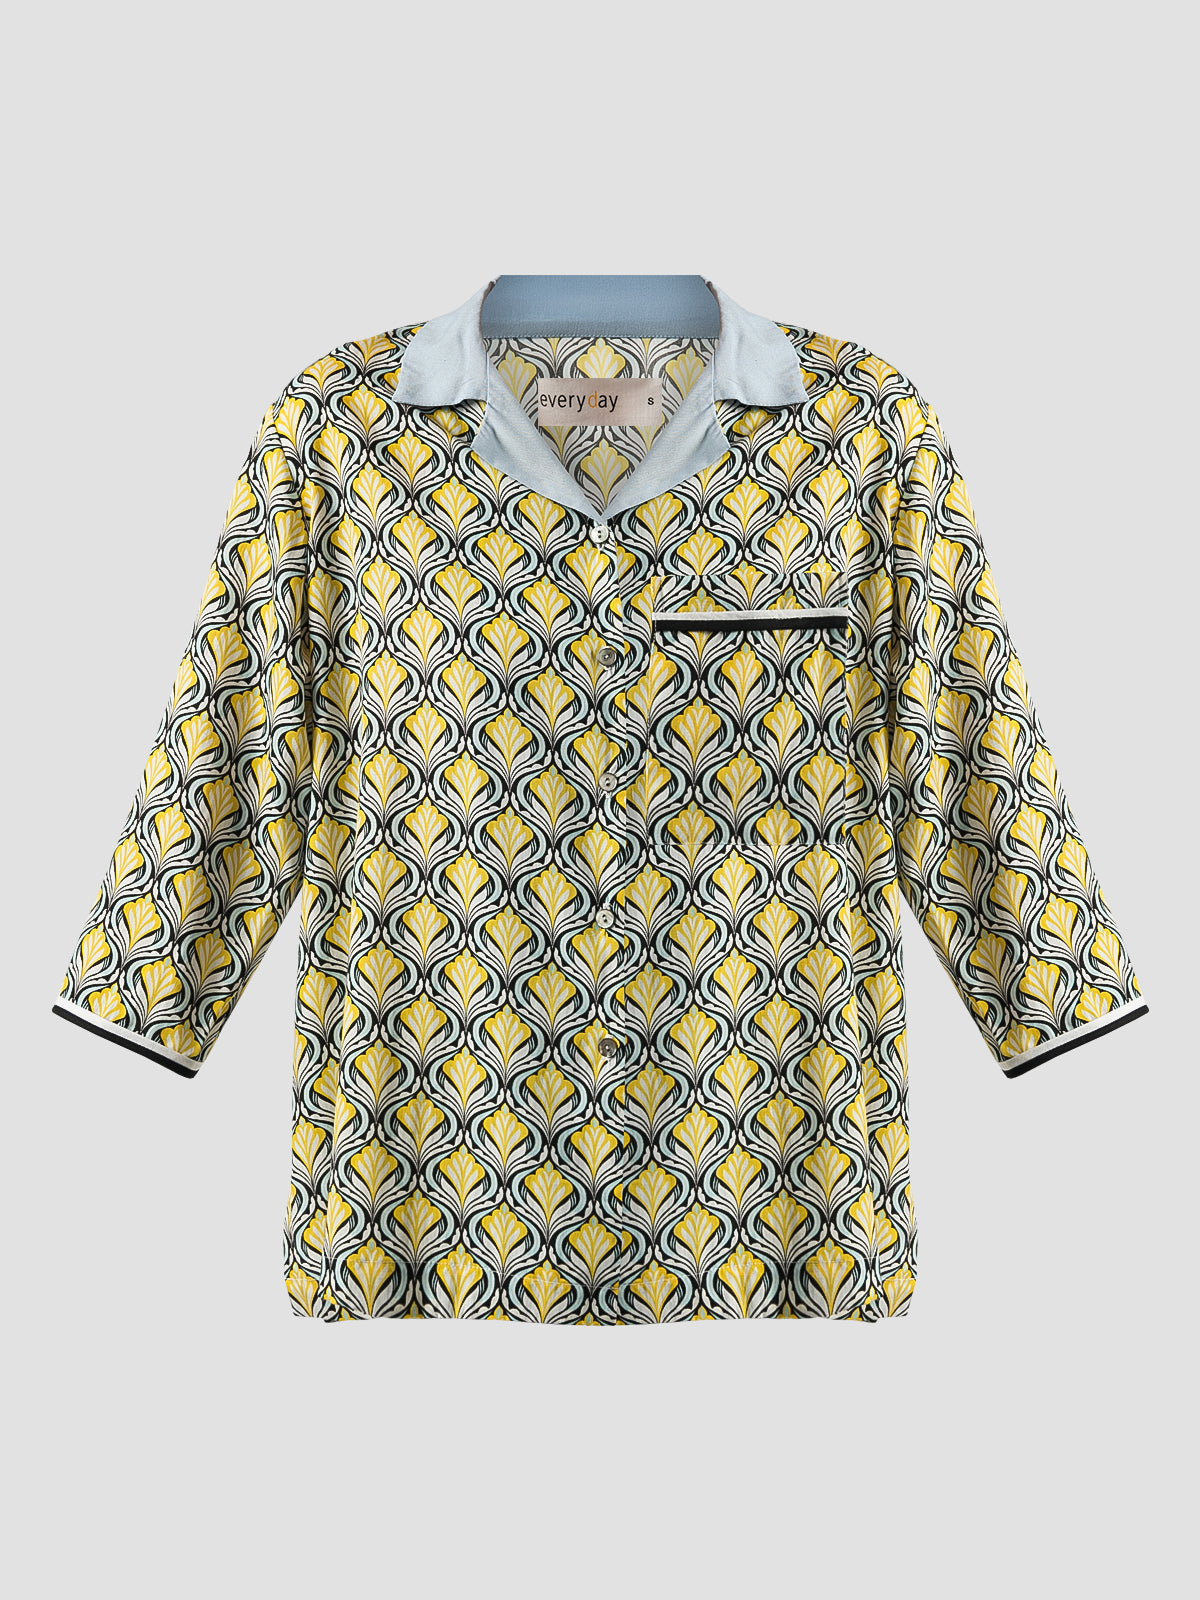 Biva Contrasted Collar Shirt In Yellow-Black